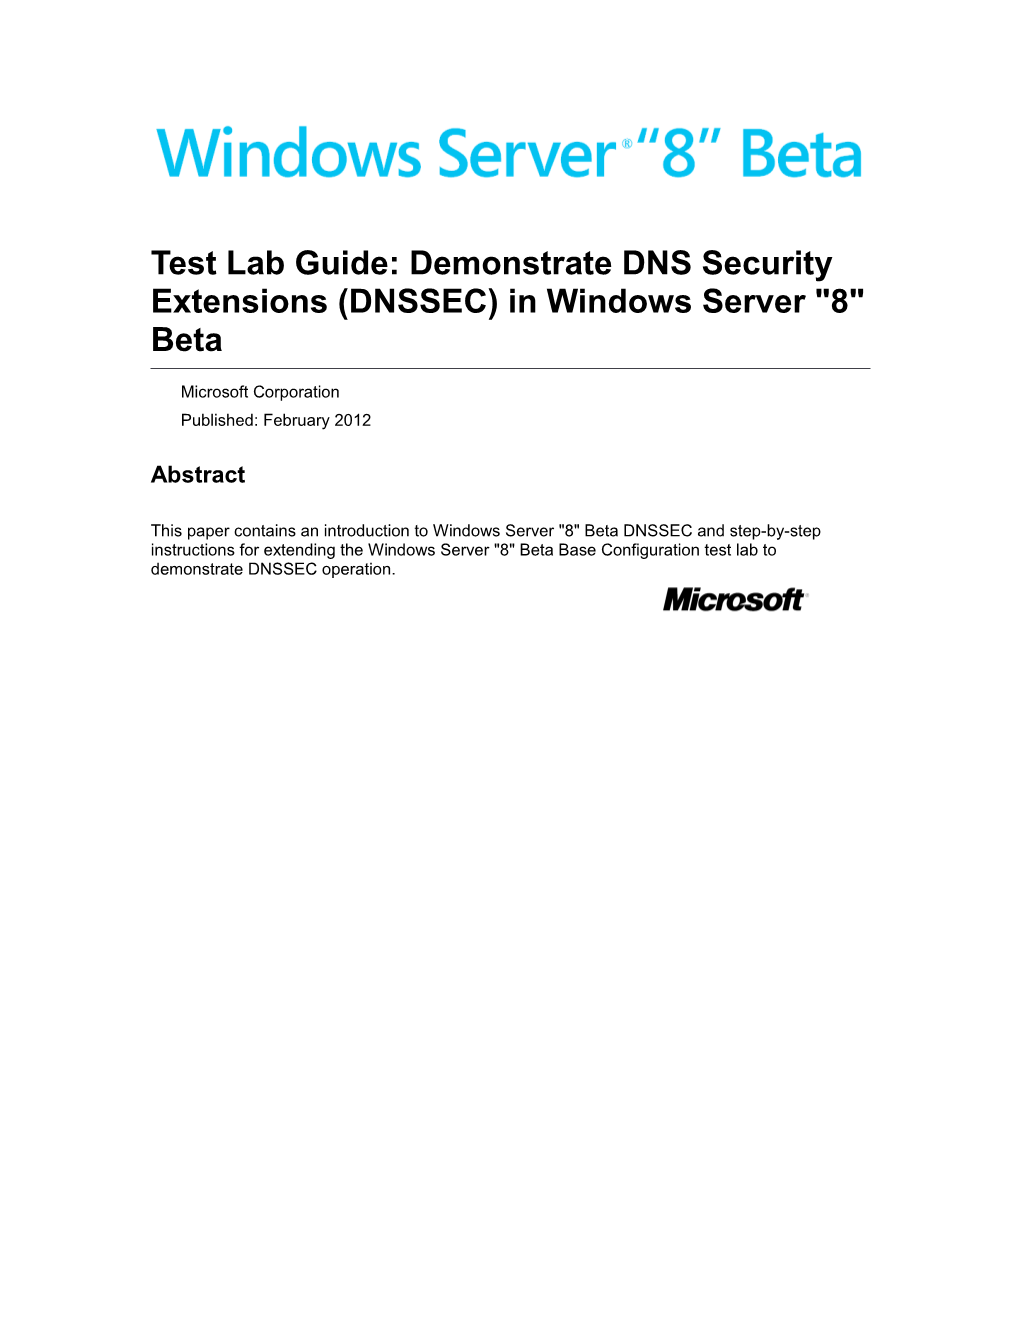 Test Lab Guide: Demonstrate DNS Security Extensions (DNSSEC) in Windows Server 8 Beta